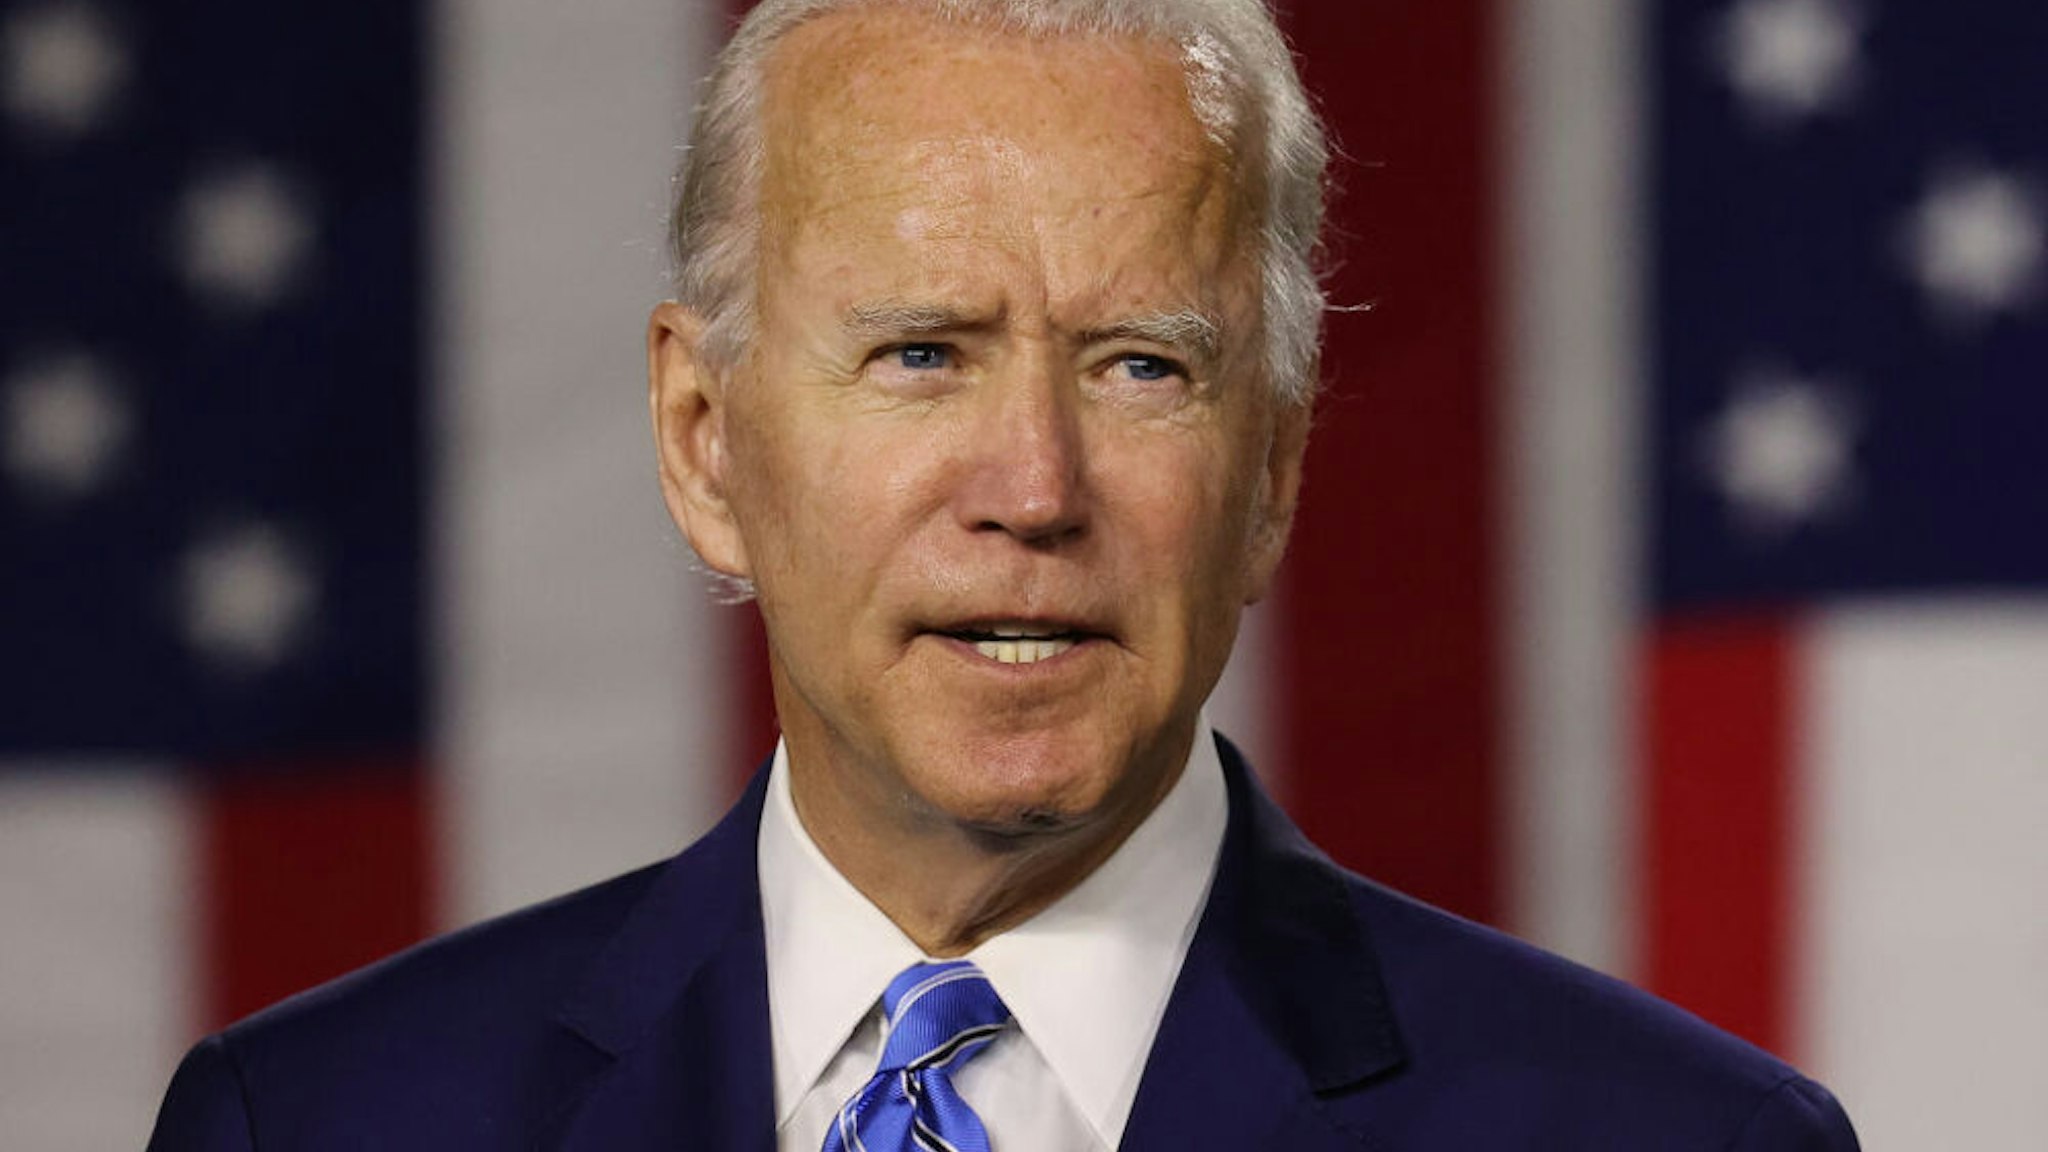 WILMINGTON, DELAWARE - JULY 14: Democratic presidential candidate former Vice President Joe Biden speaks at the Chase Center July 14, 2020 in Wilmington, Delaware. Biden delivered remarks on his campaign's 'Build Back Better' clean energy economic plan.